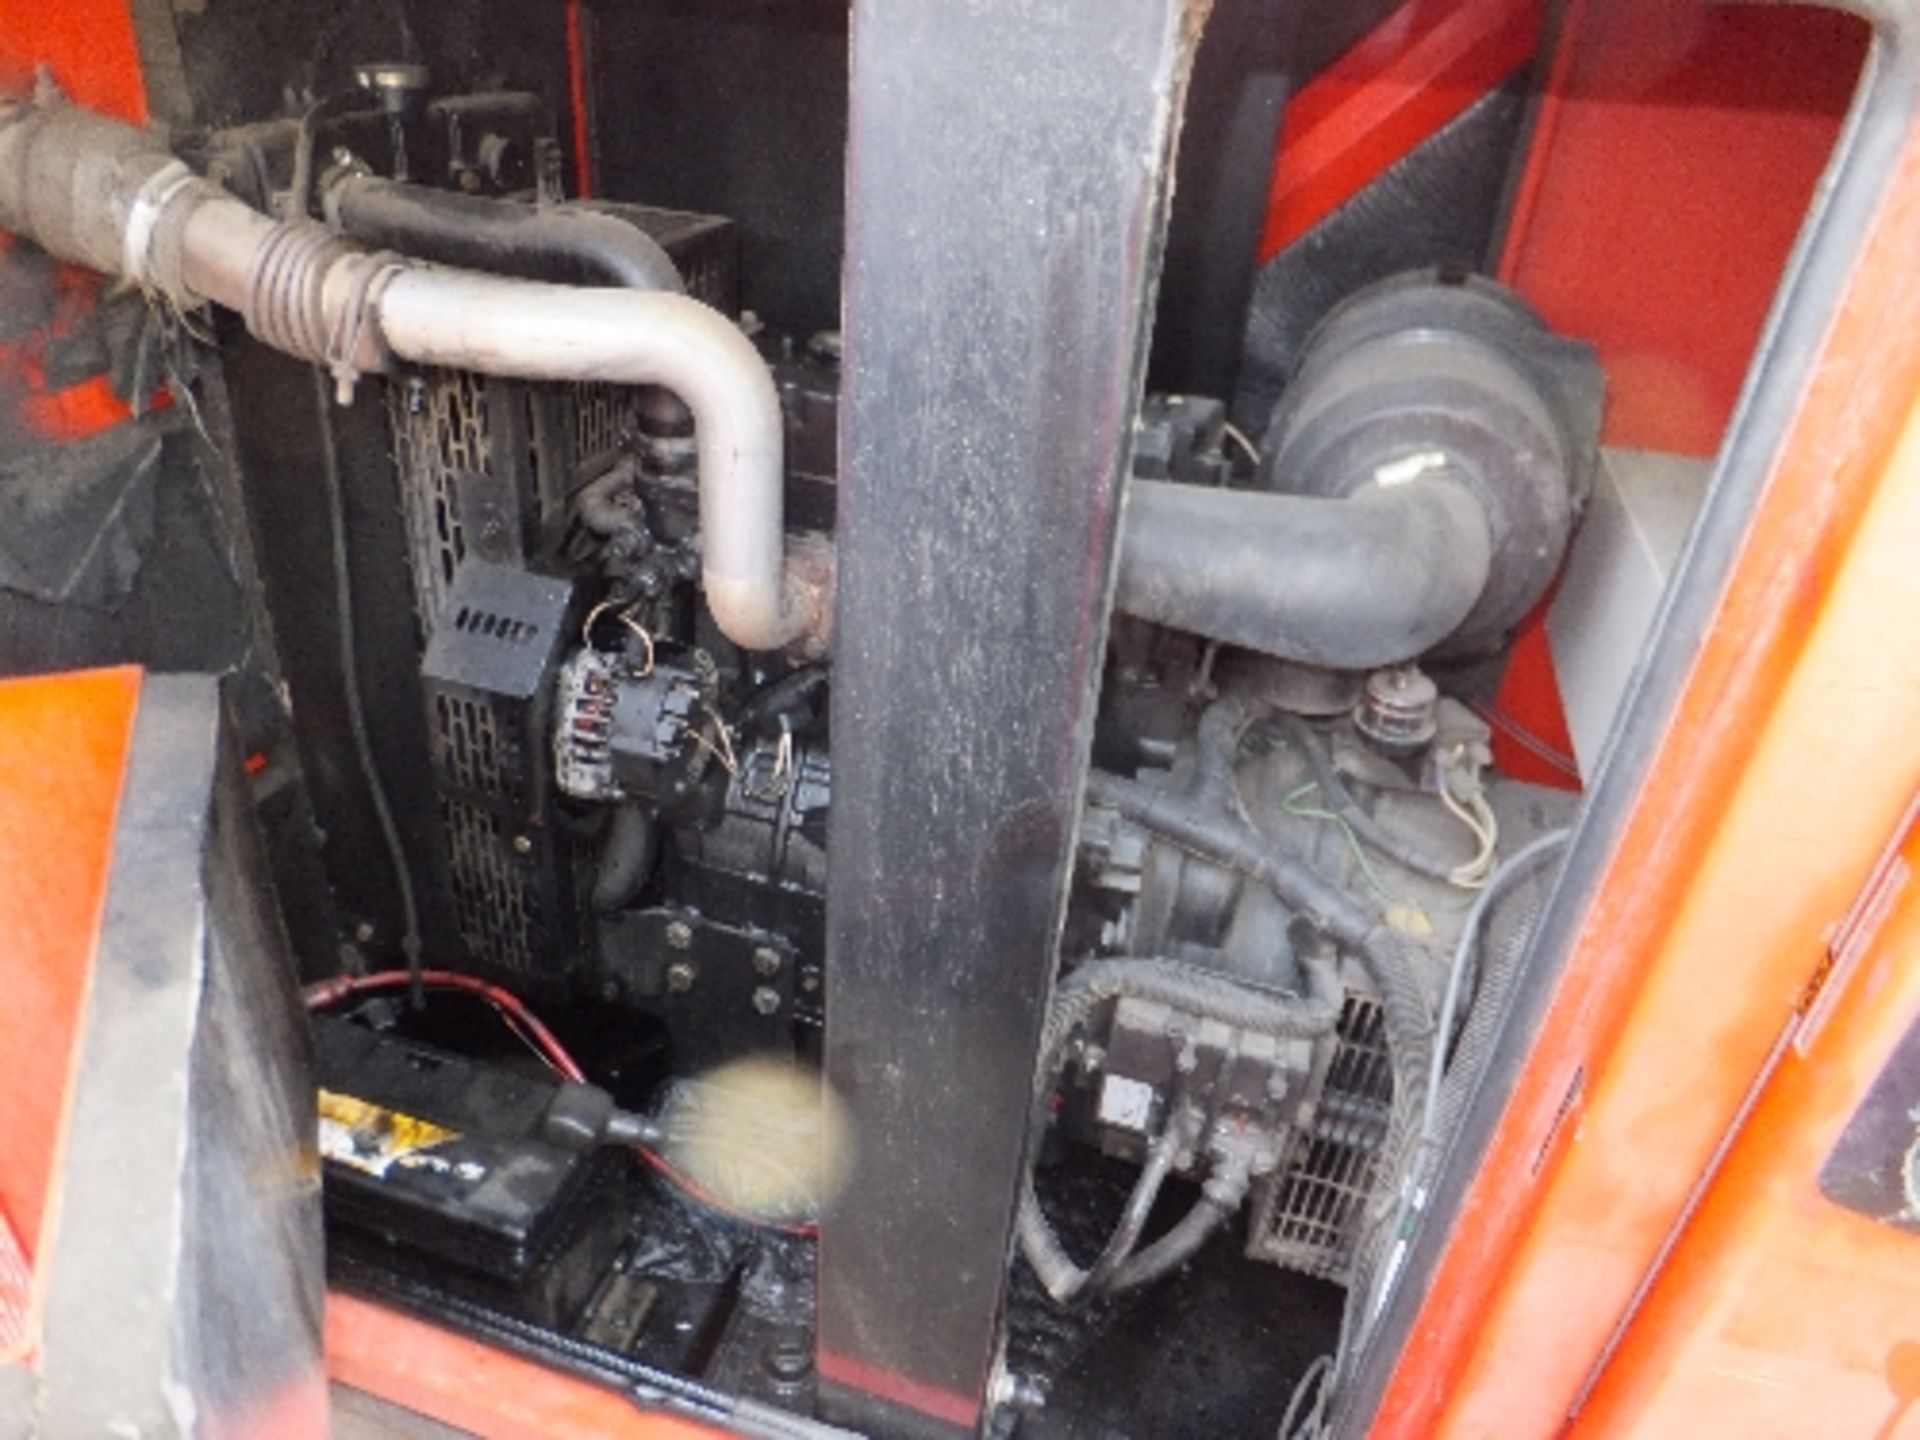 FG Wilson 20kva generator  - RMP This lot is sold on instruction of Speedy - Image 3 of 4